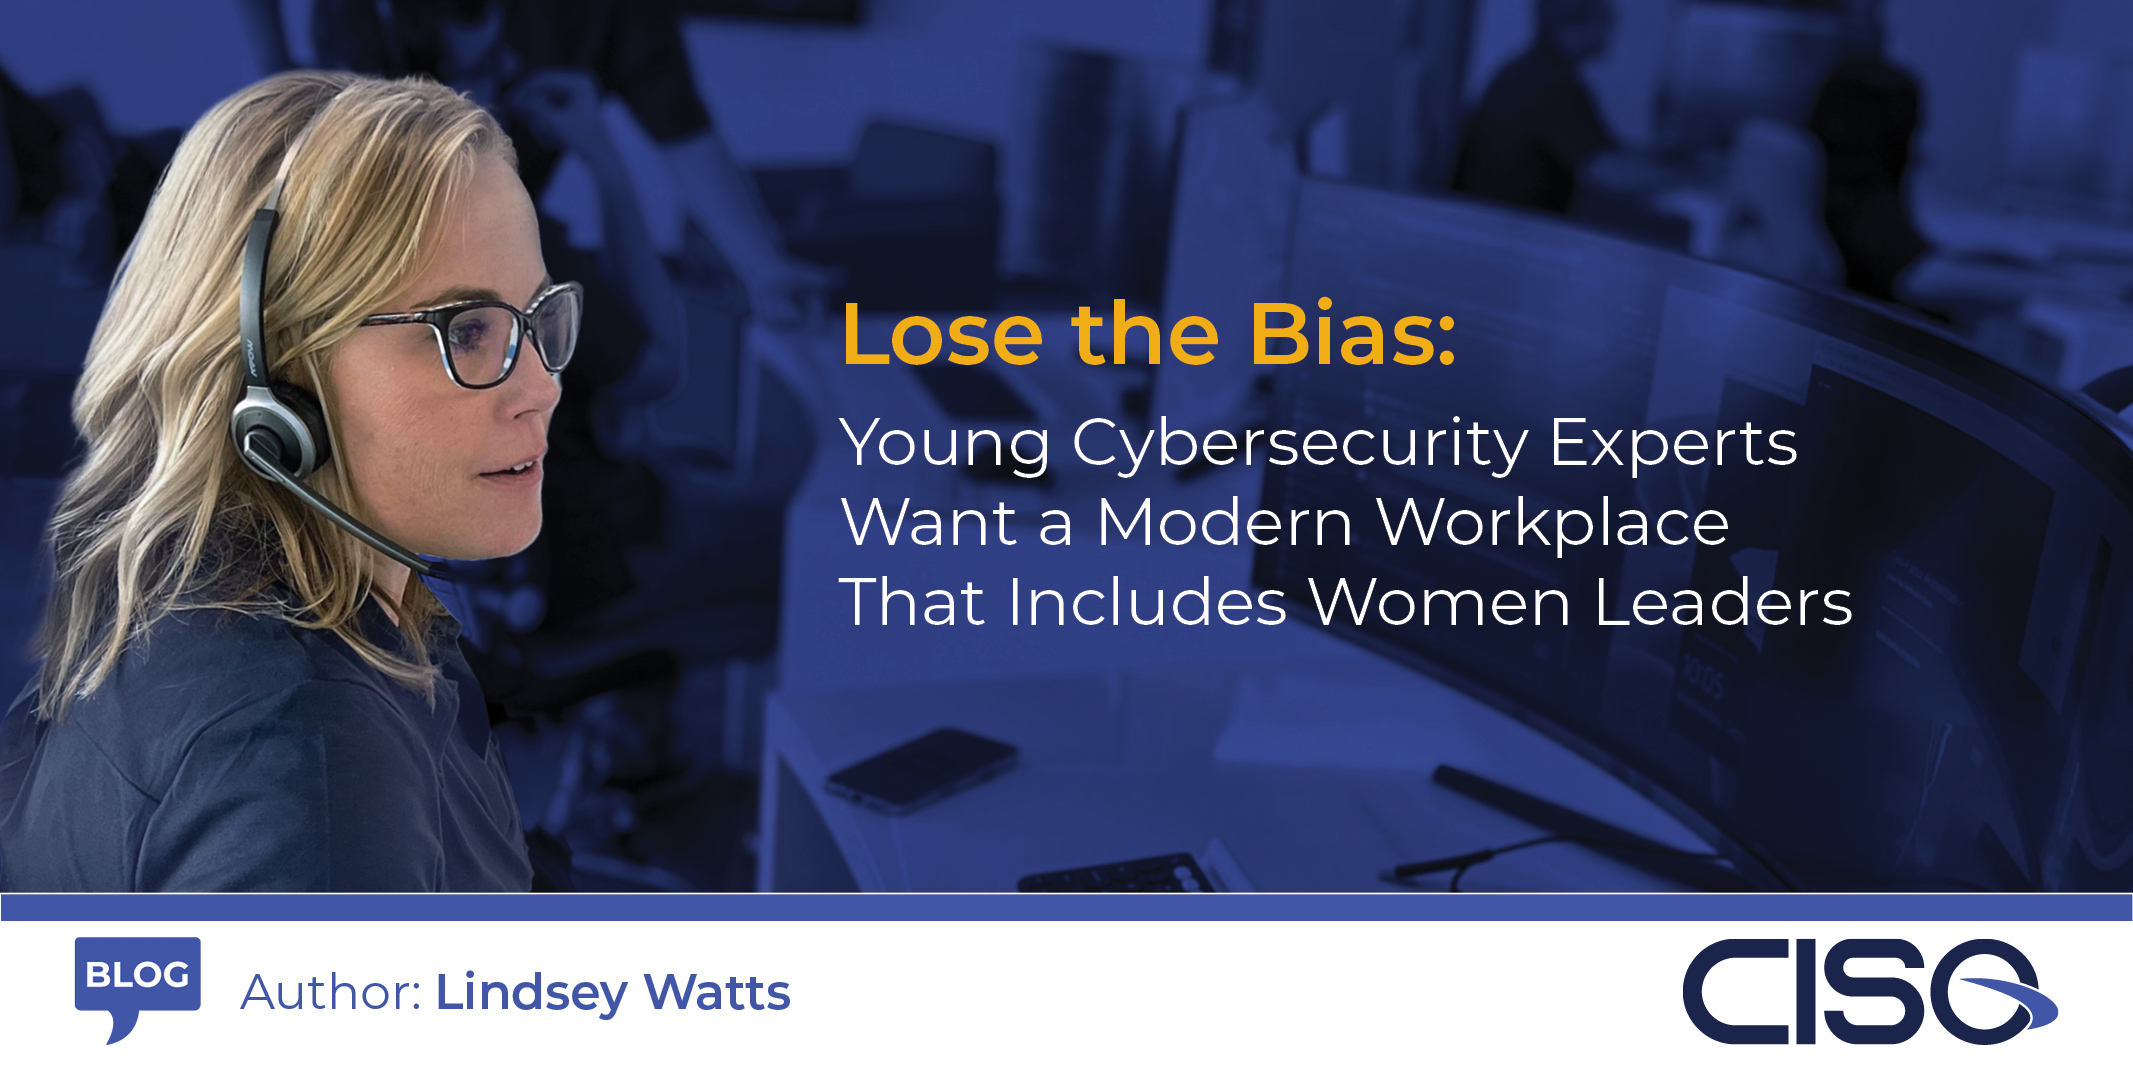 Lose the Bias: Young Cybersecurity Experts Want a Modern Workplace That Includes Women Leaders